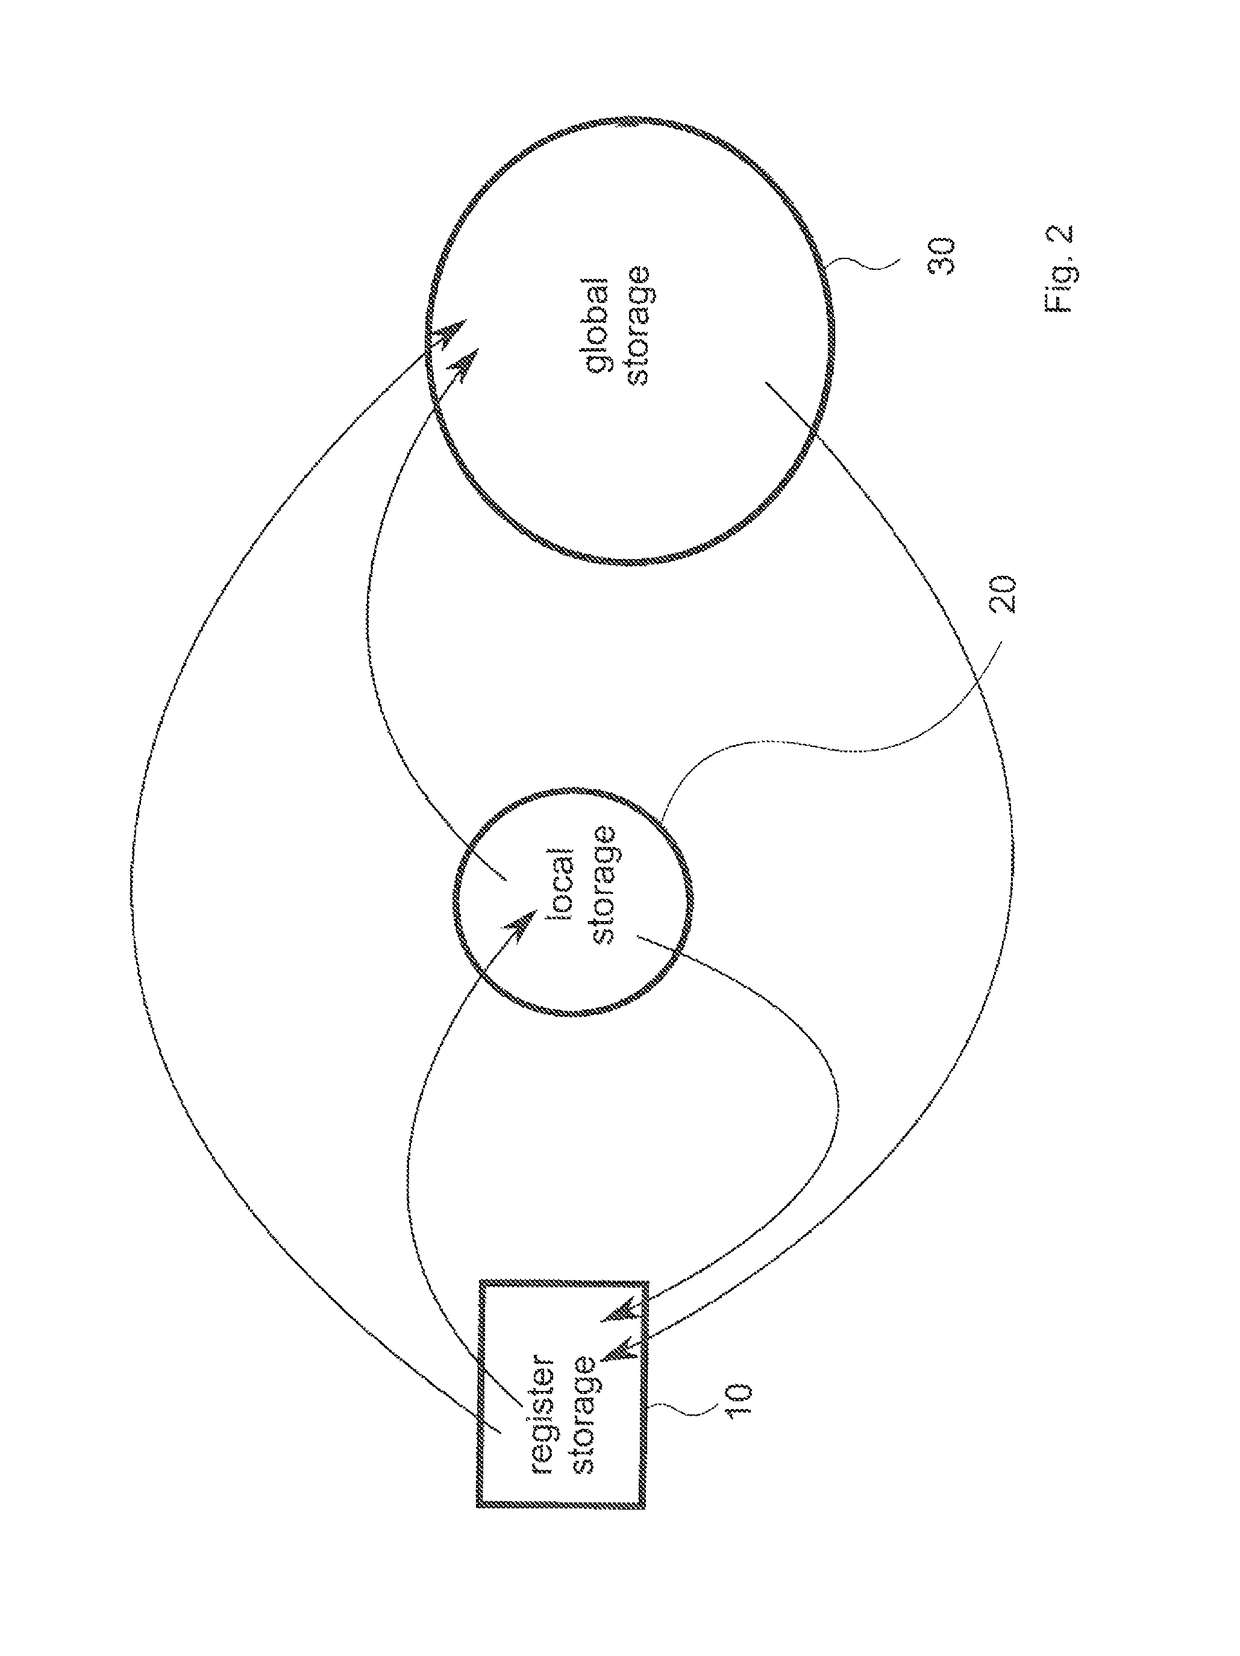 Method and system for mapping an integral into a thread of a parallel architecture